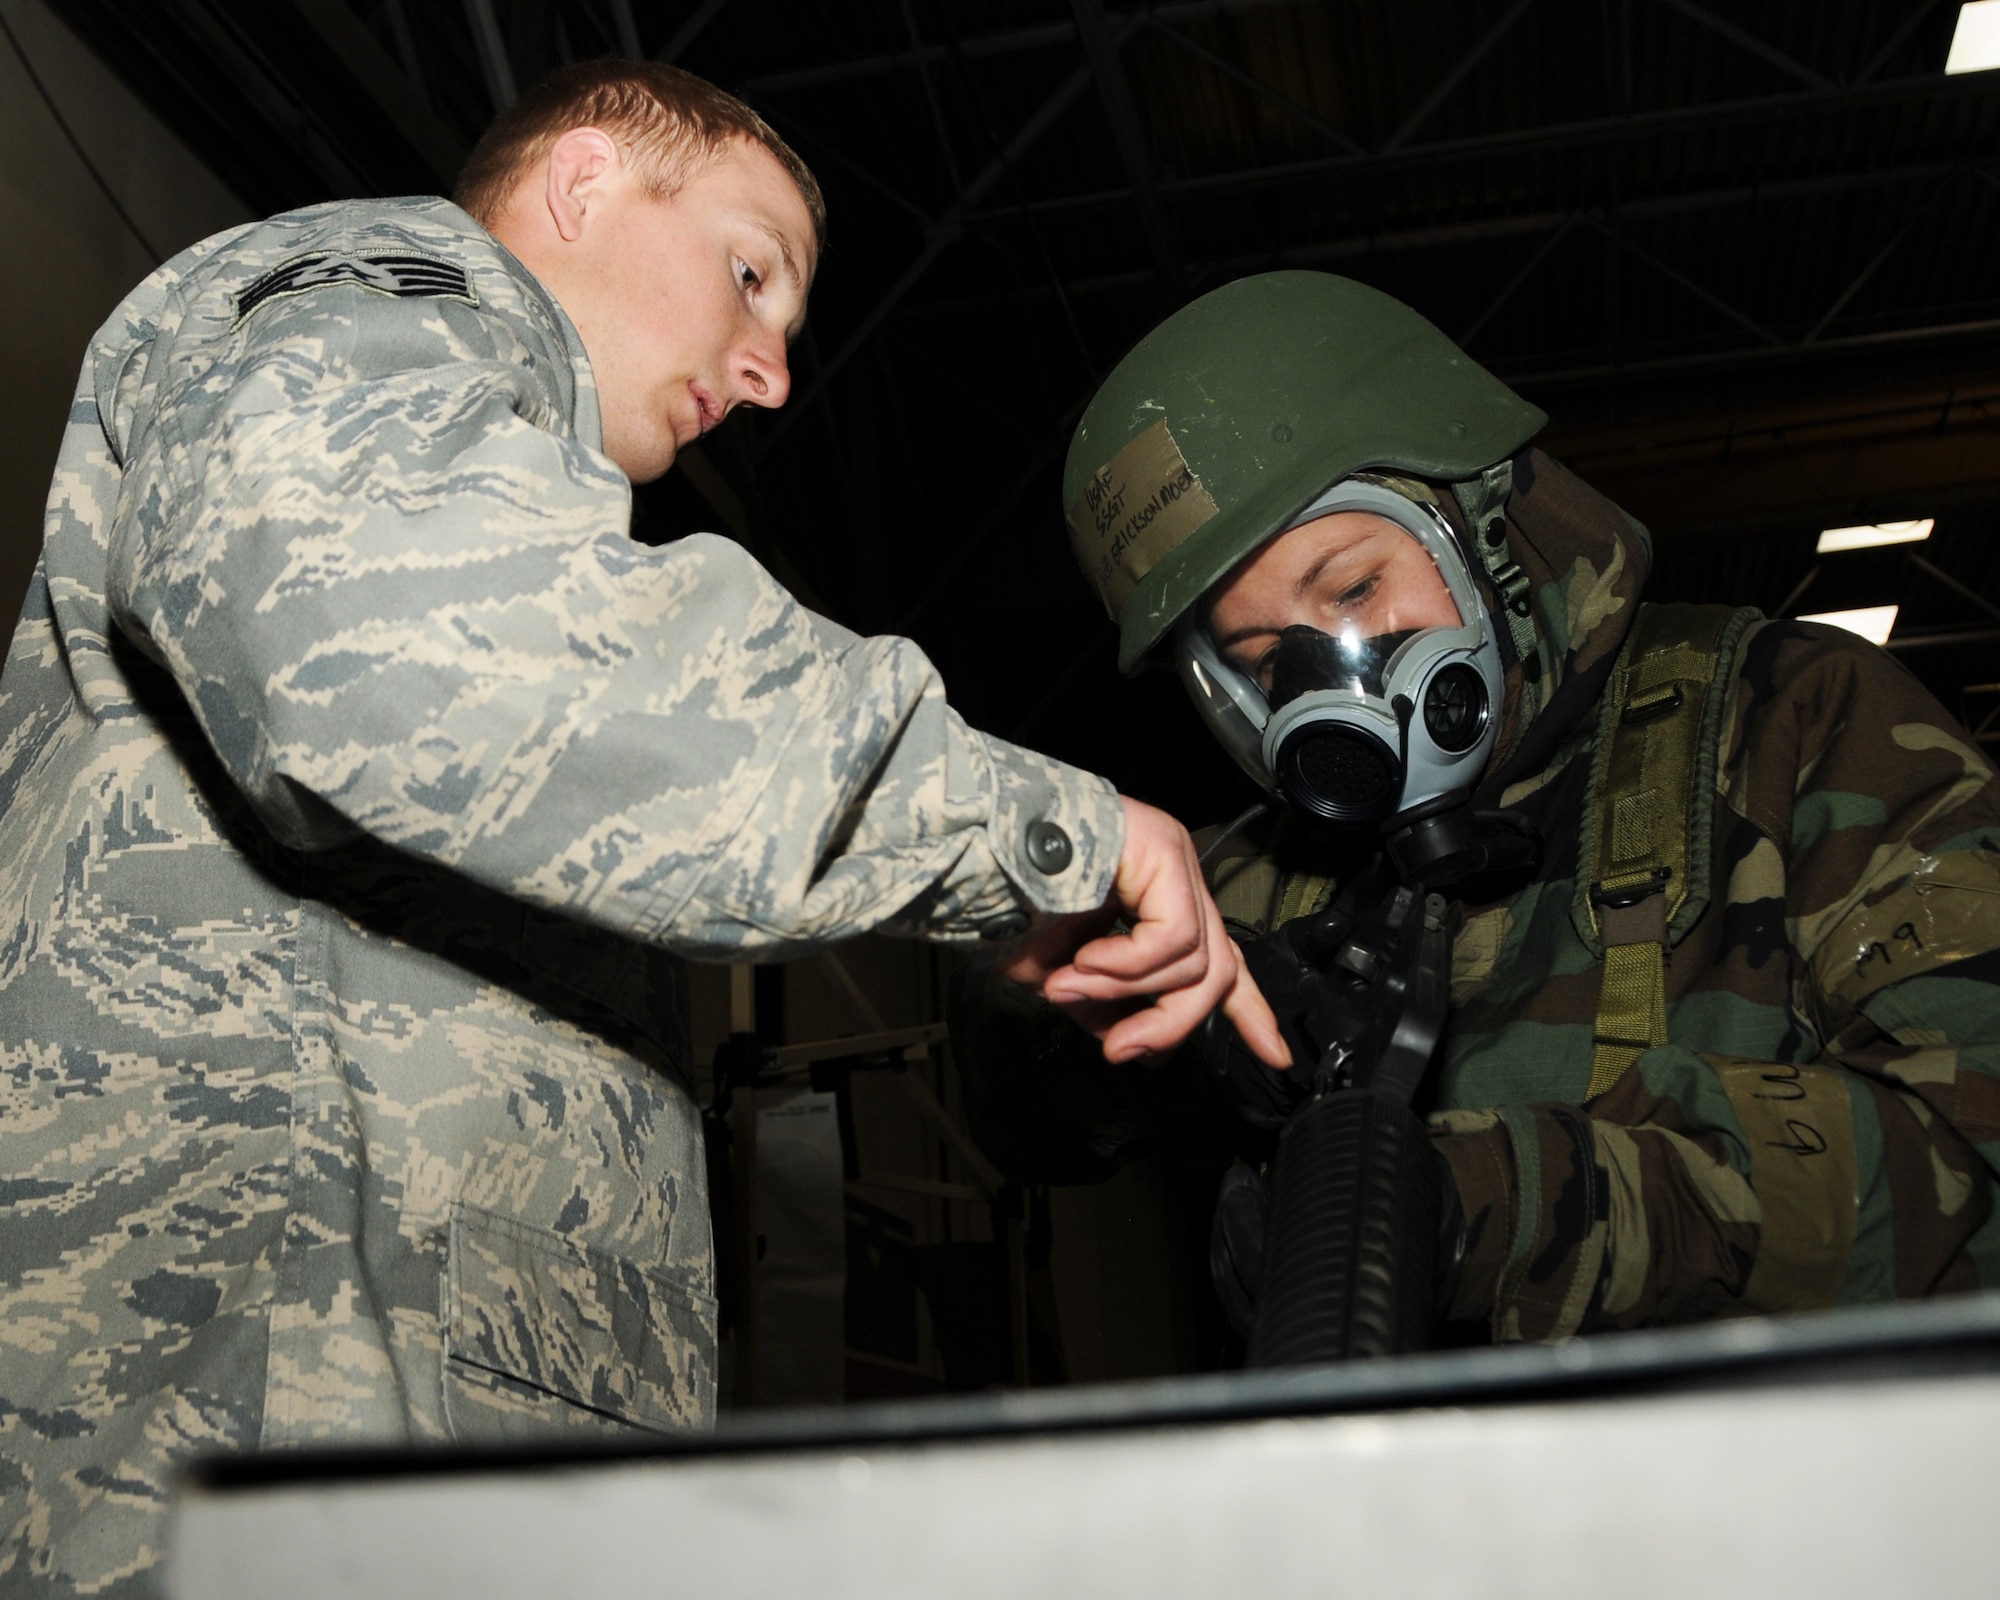 Staff Sgt. Anthony Nickell, 944th Security Forces Squadron, points down the
chamber of an M-16 A2 rifle to show Staff Sgt. Dee Erickson-Moen, 944th
Aeromedical Staging Squadron, that the weapon is clear during a hands-on
Readiness Training Exercise Feb. 13, 2011. (U.S. Air Force photo/Staff Sgt.
Louis Vega Jr.)
